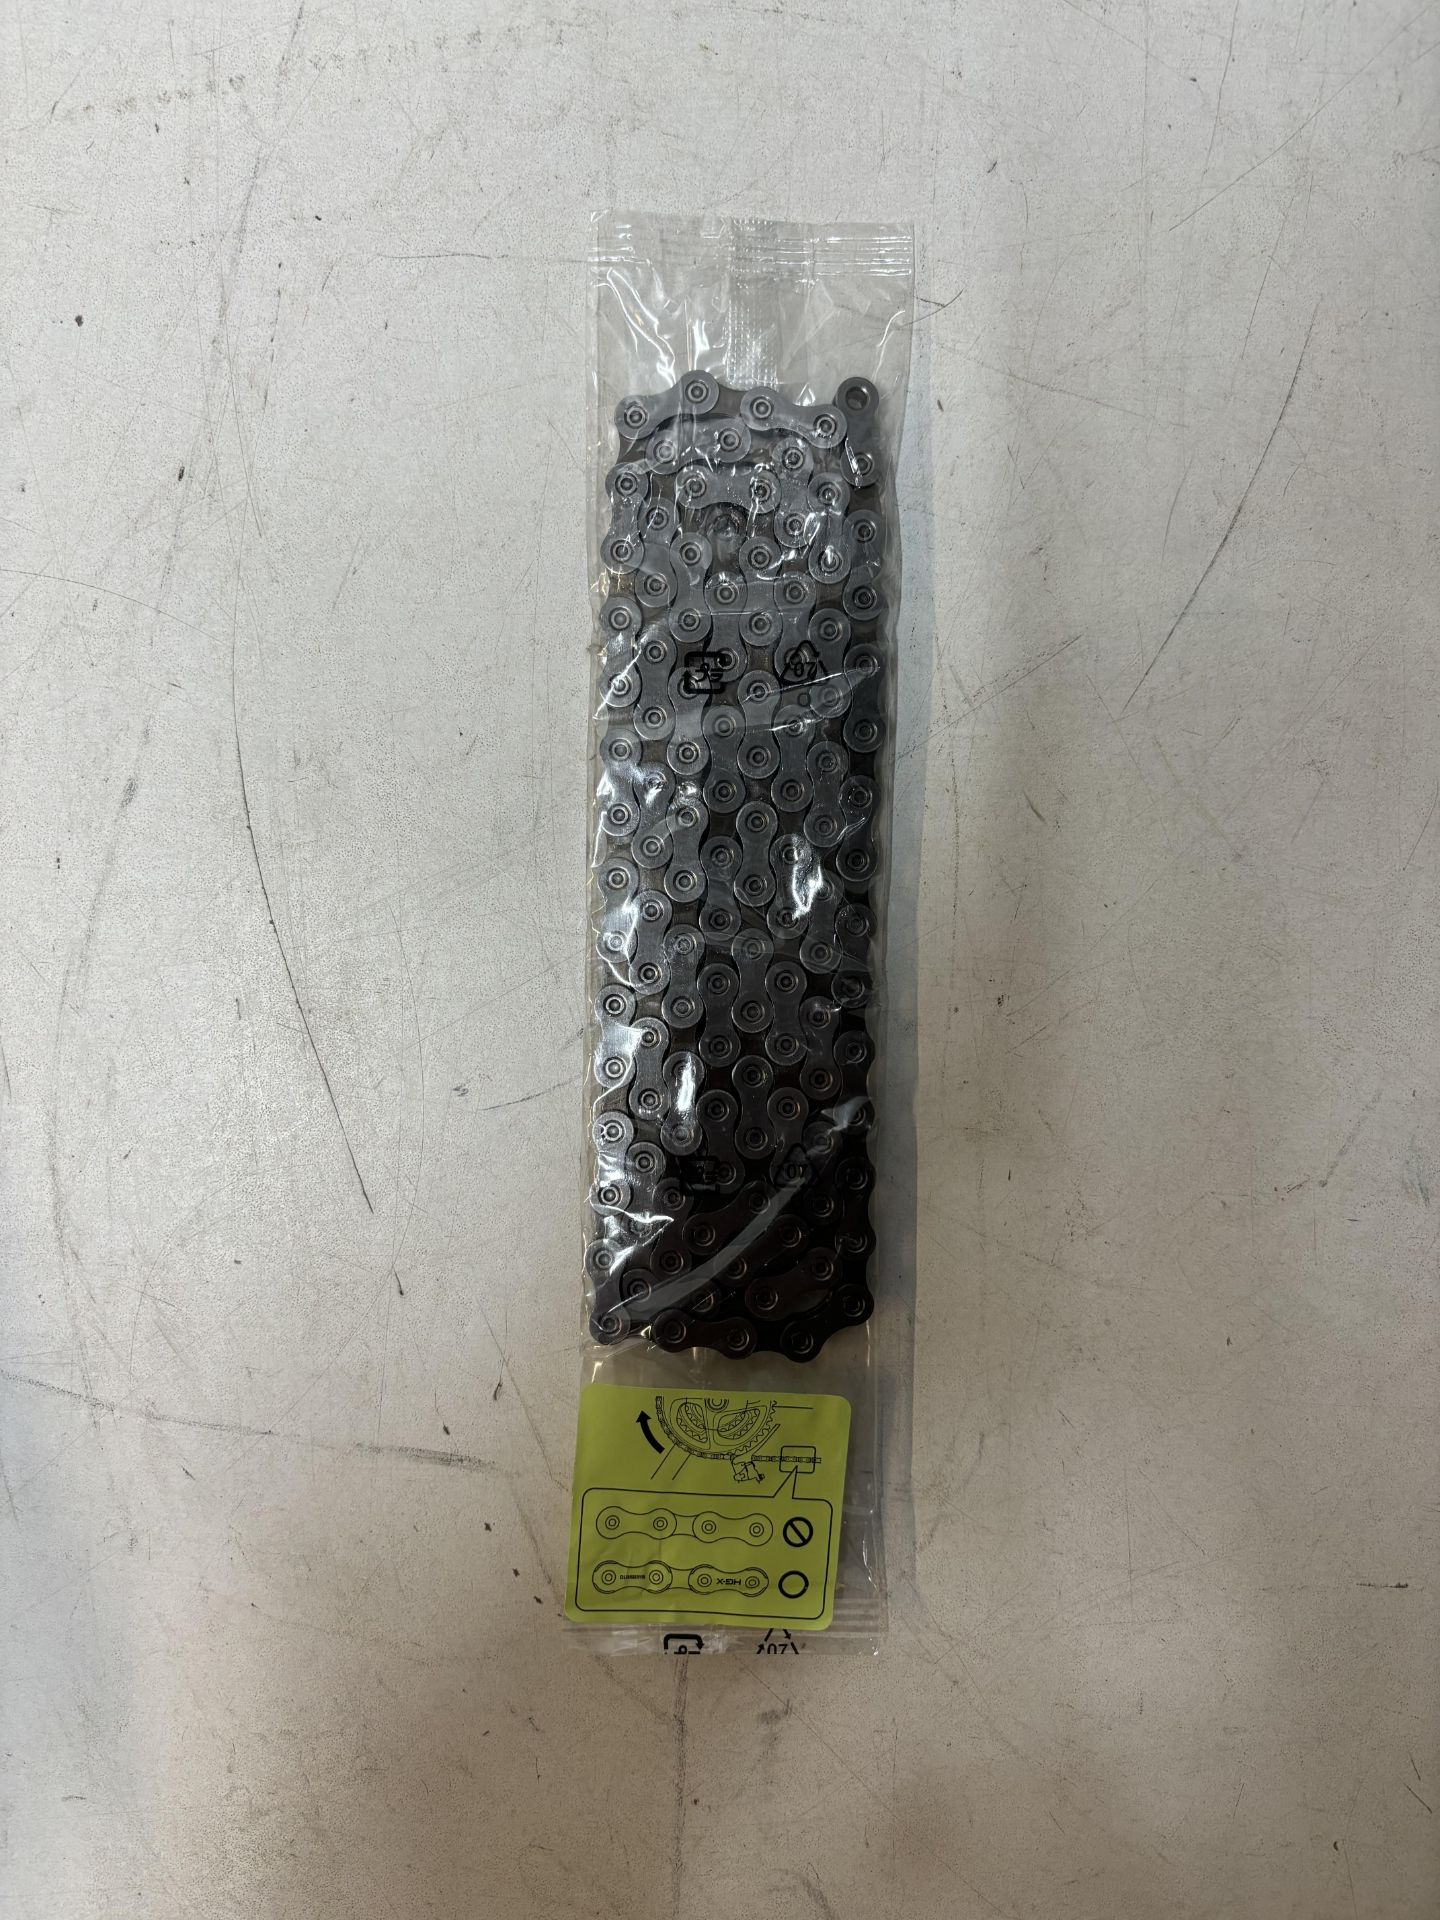 6 x Shimano CN-HG54 10 Speed HG-X Chains, 116 Links - Image 2 of 2